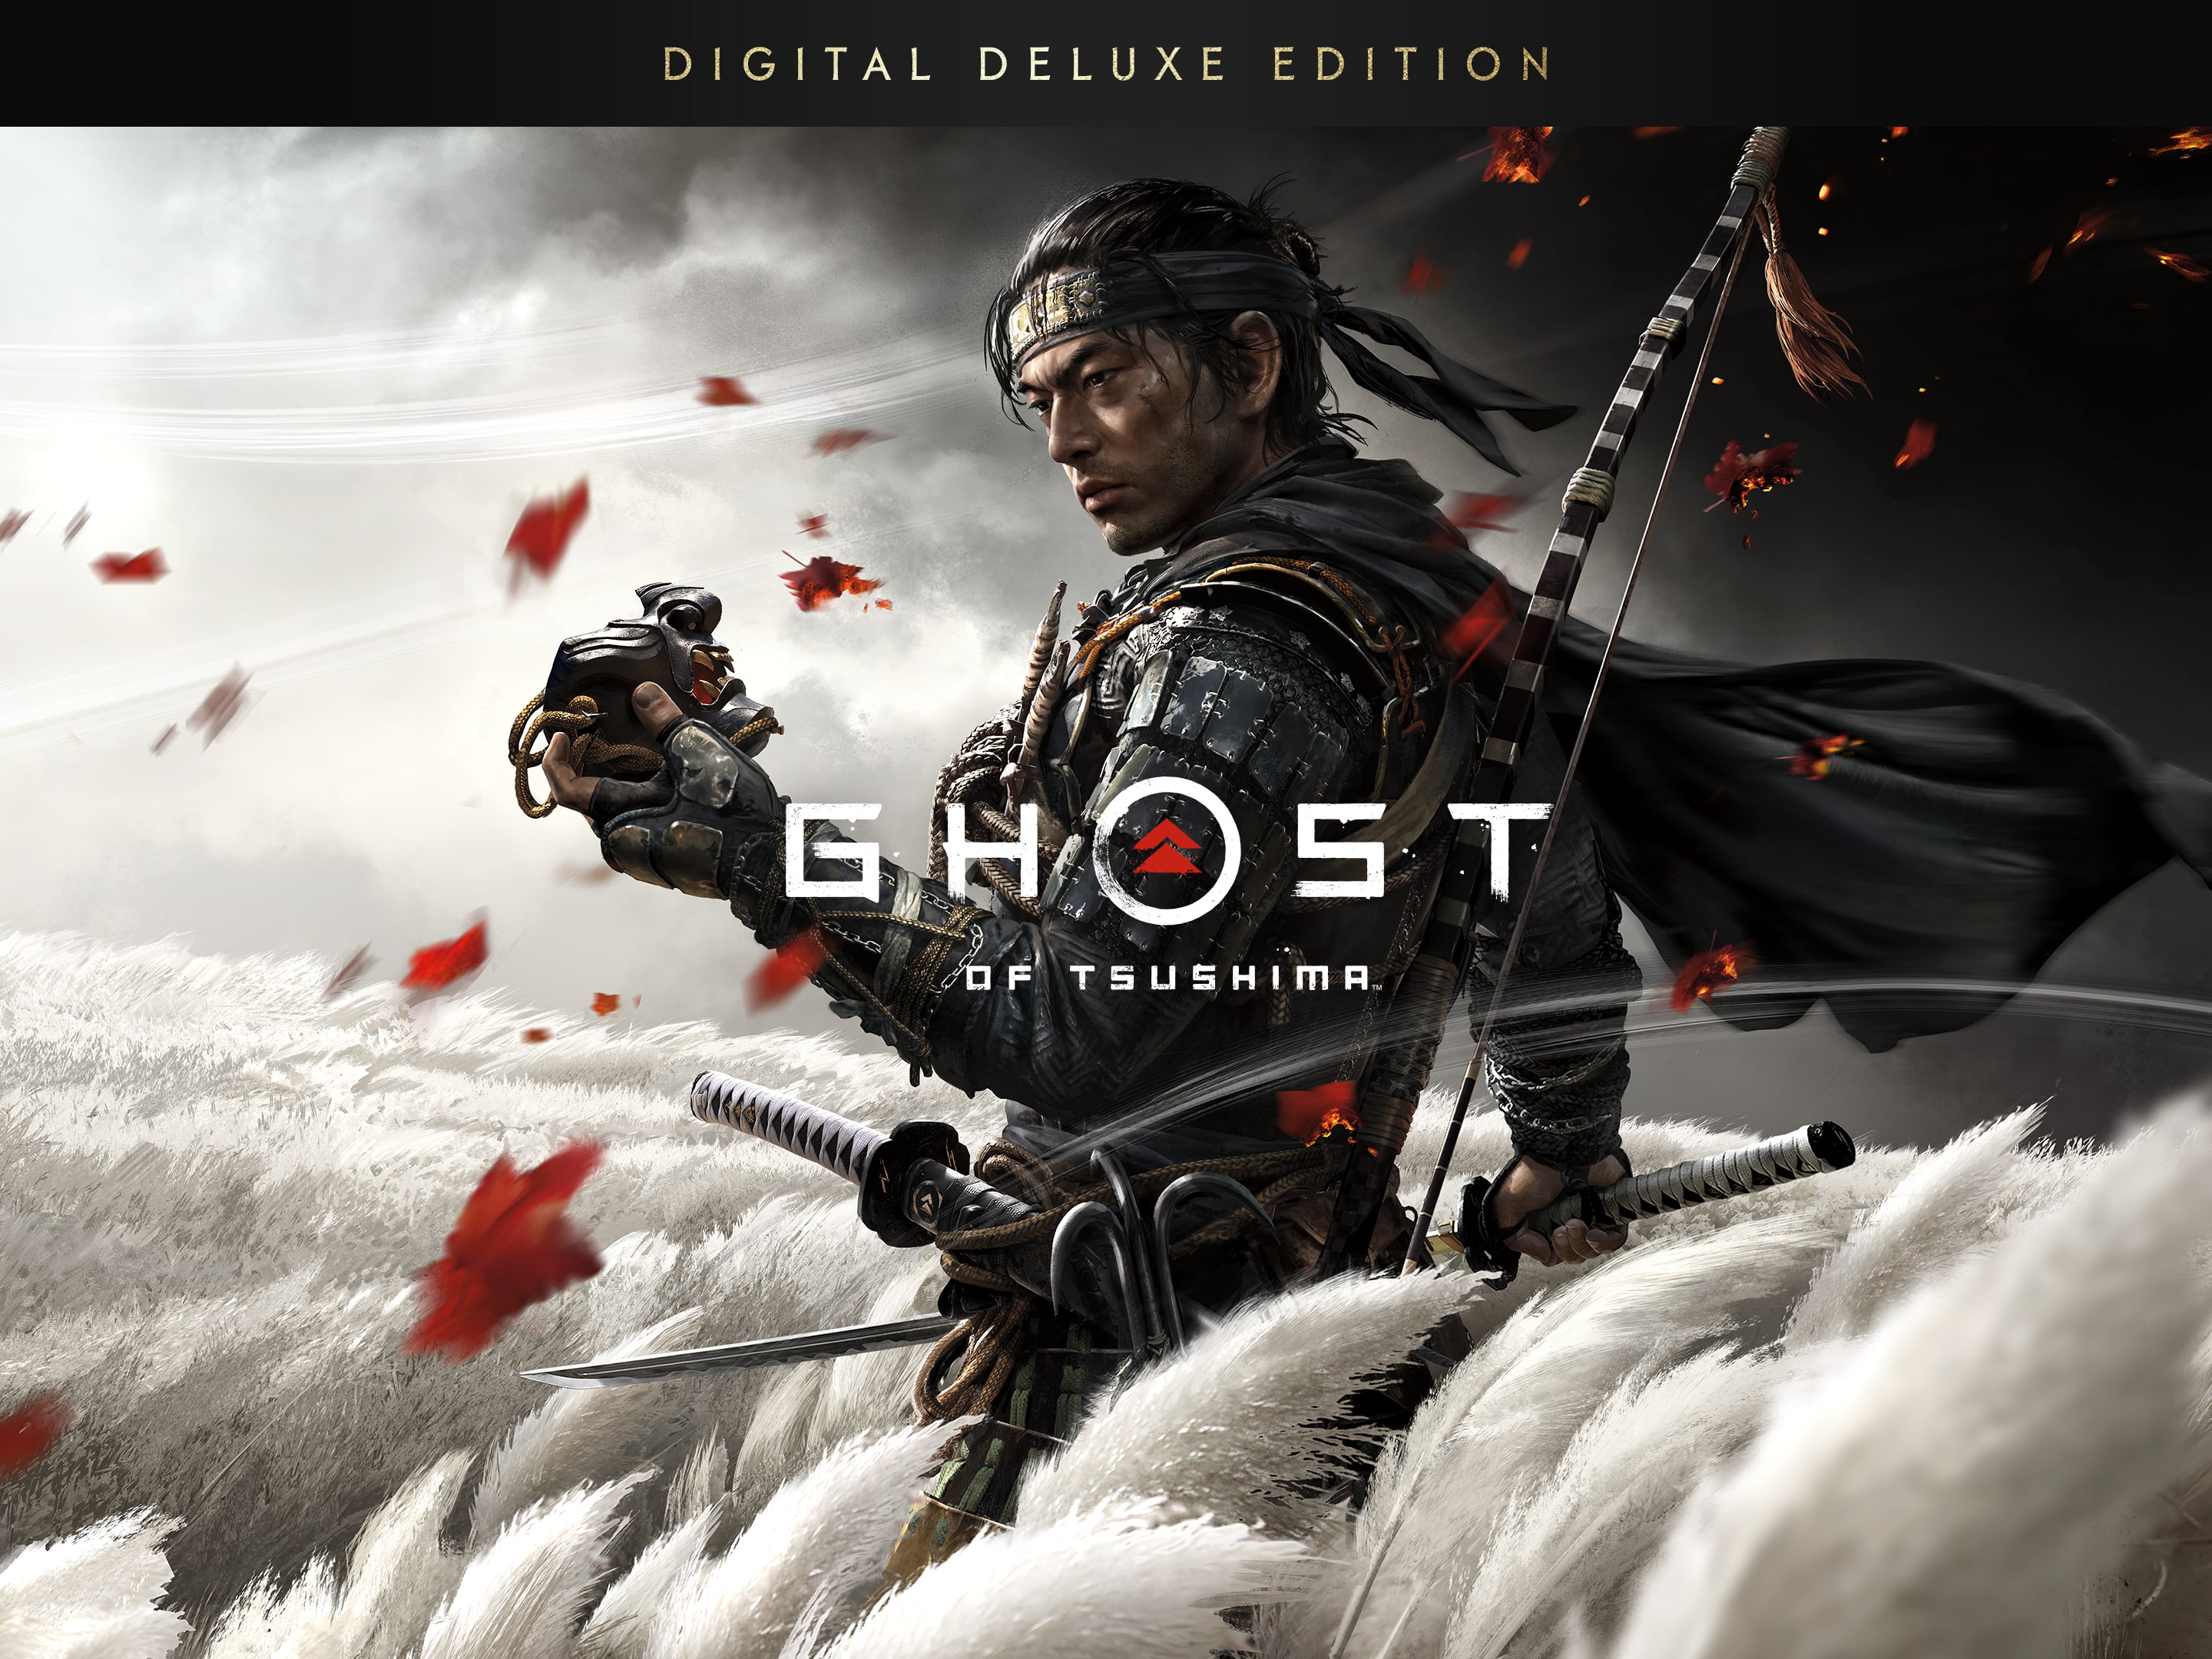 ghost of tsushima digital deluxe edition